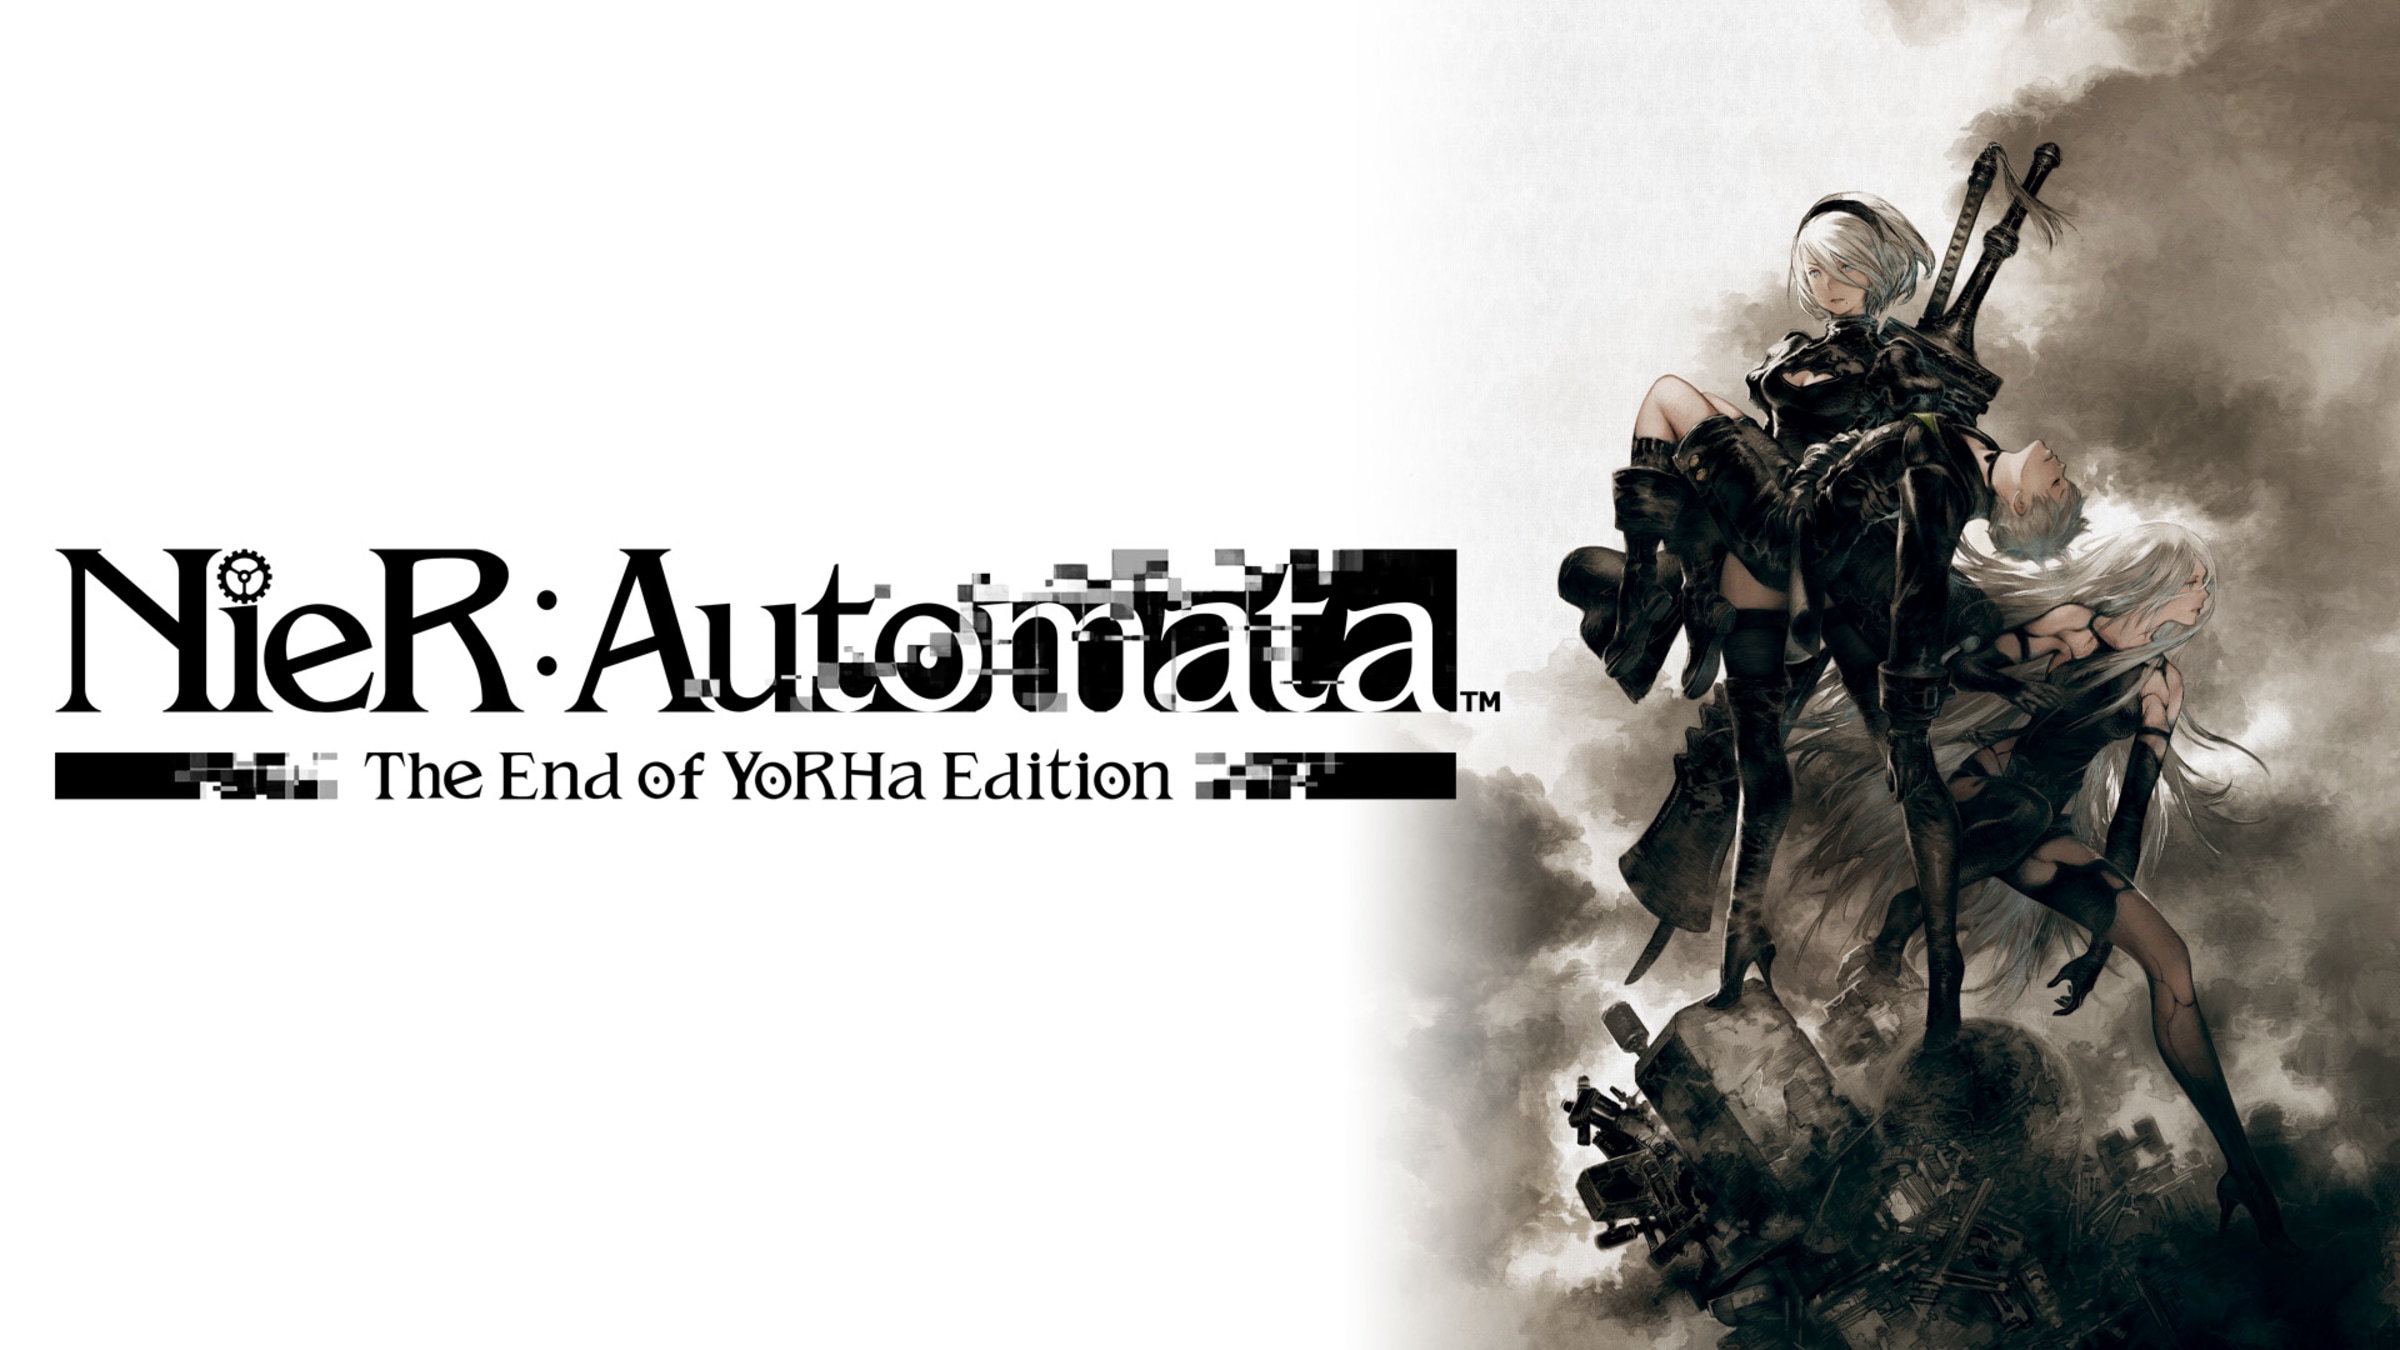 https://assets.nintendo.com/image/upload/c_fill,w_1200/q_auto:best/f_auto/dpr_2.0/ncom/en_US/games/switch/n/nier-automata-the-end-of-yorha-edition-switch/